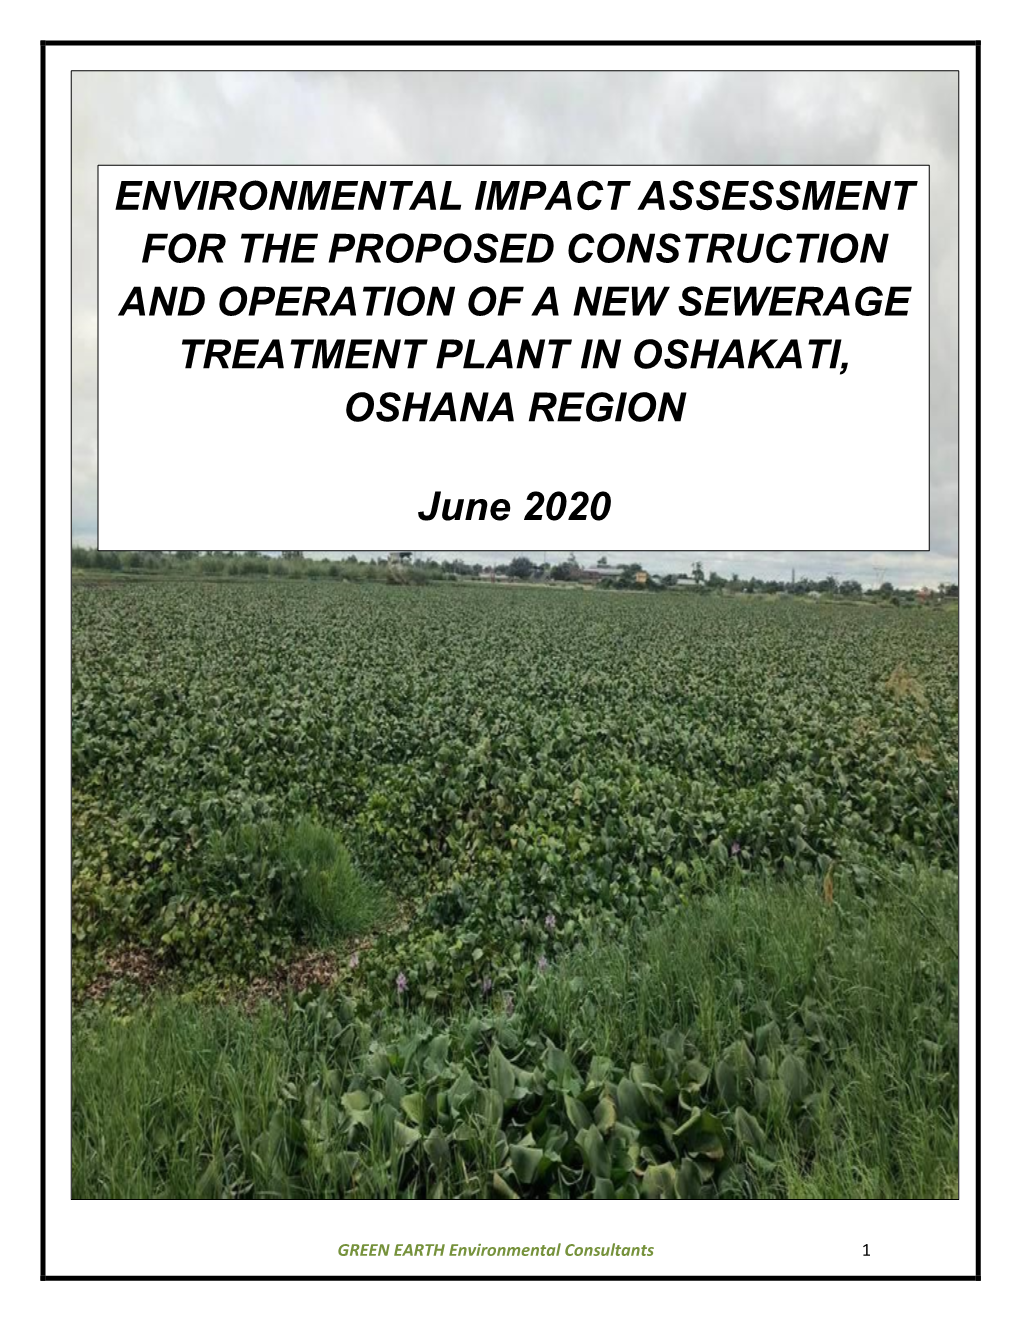 Environmental Impact Assessment for the Proposed Construction and Operation of a New Sewerage Treatment Plant in Oshakati, Oshana Region